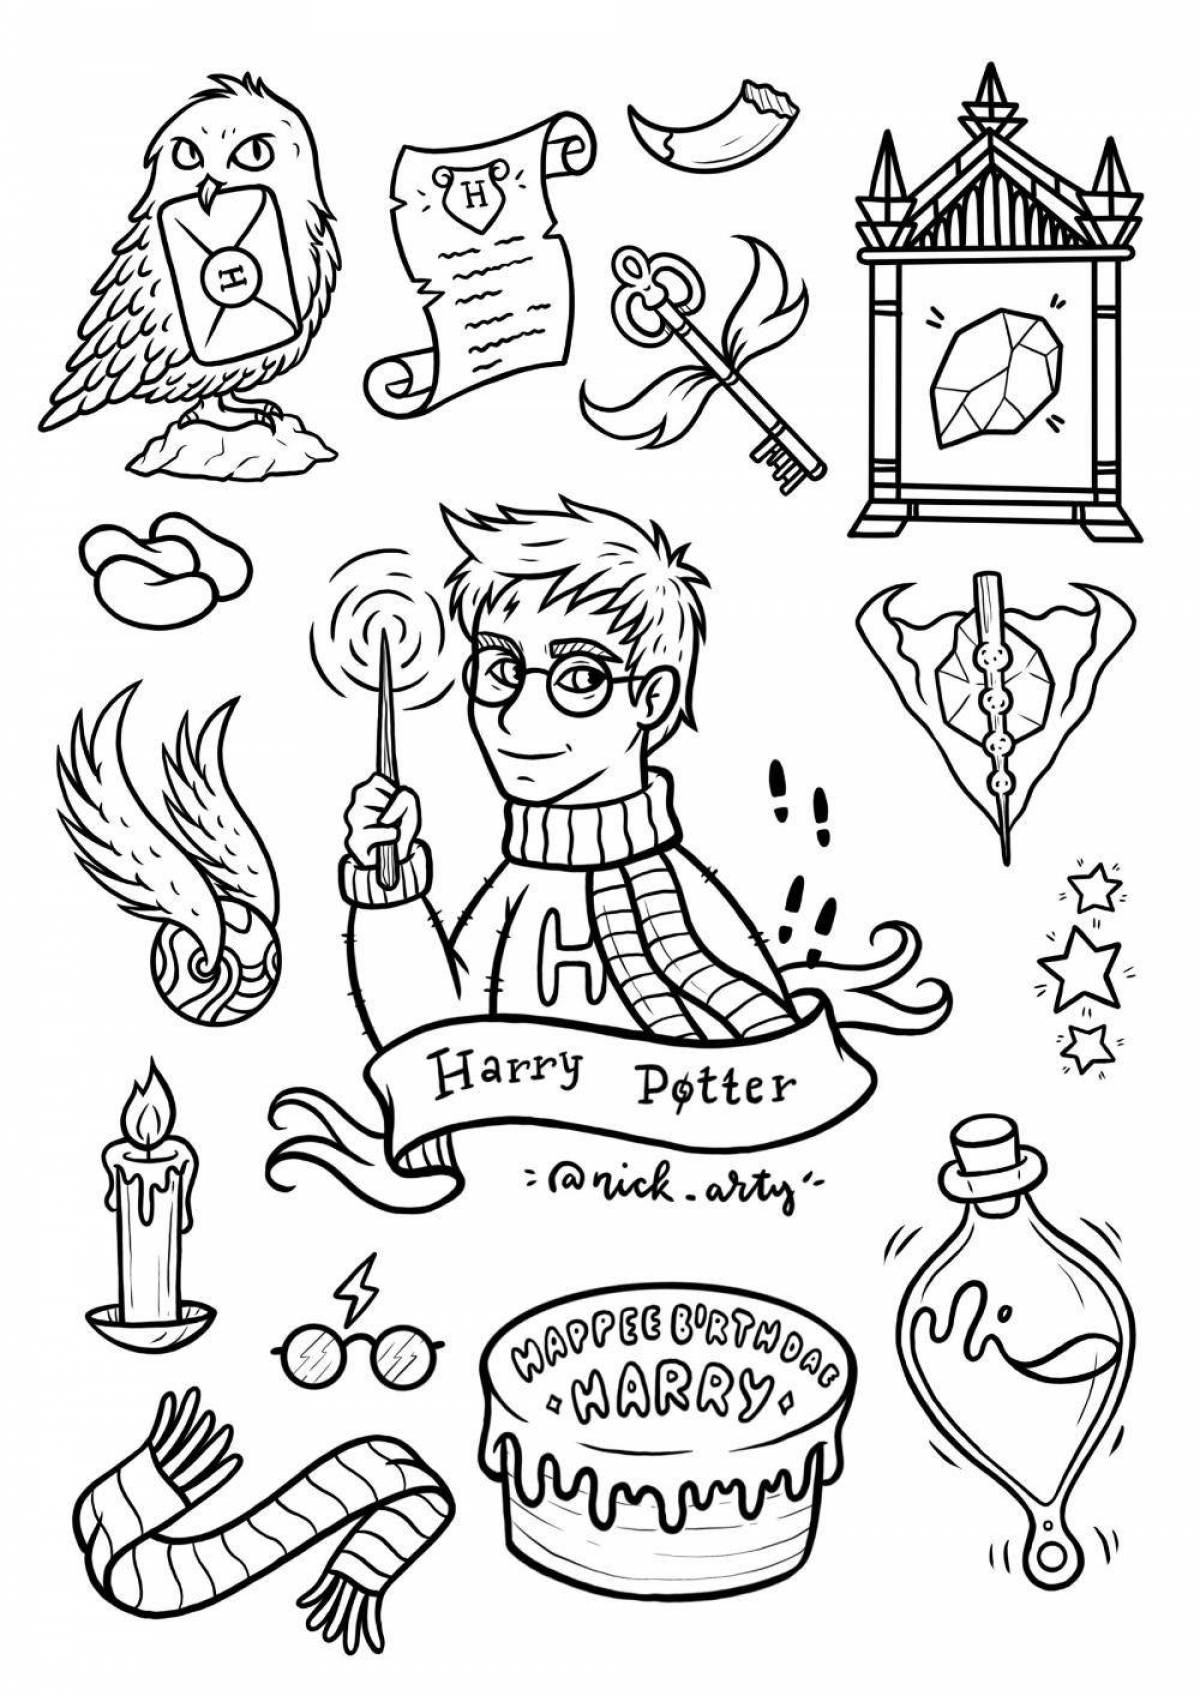 Harry Potter colorful coloring pages